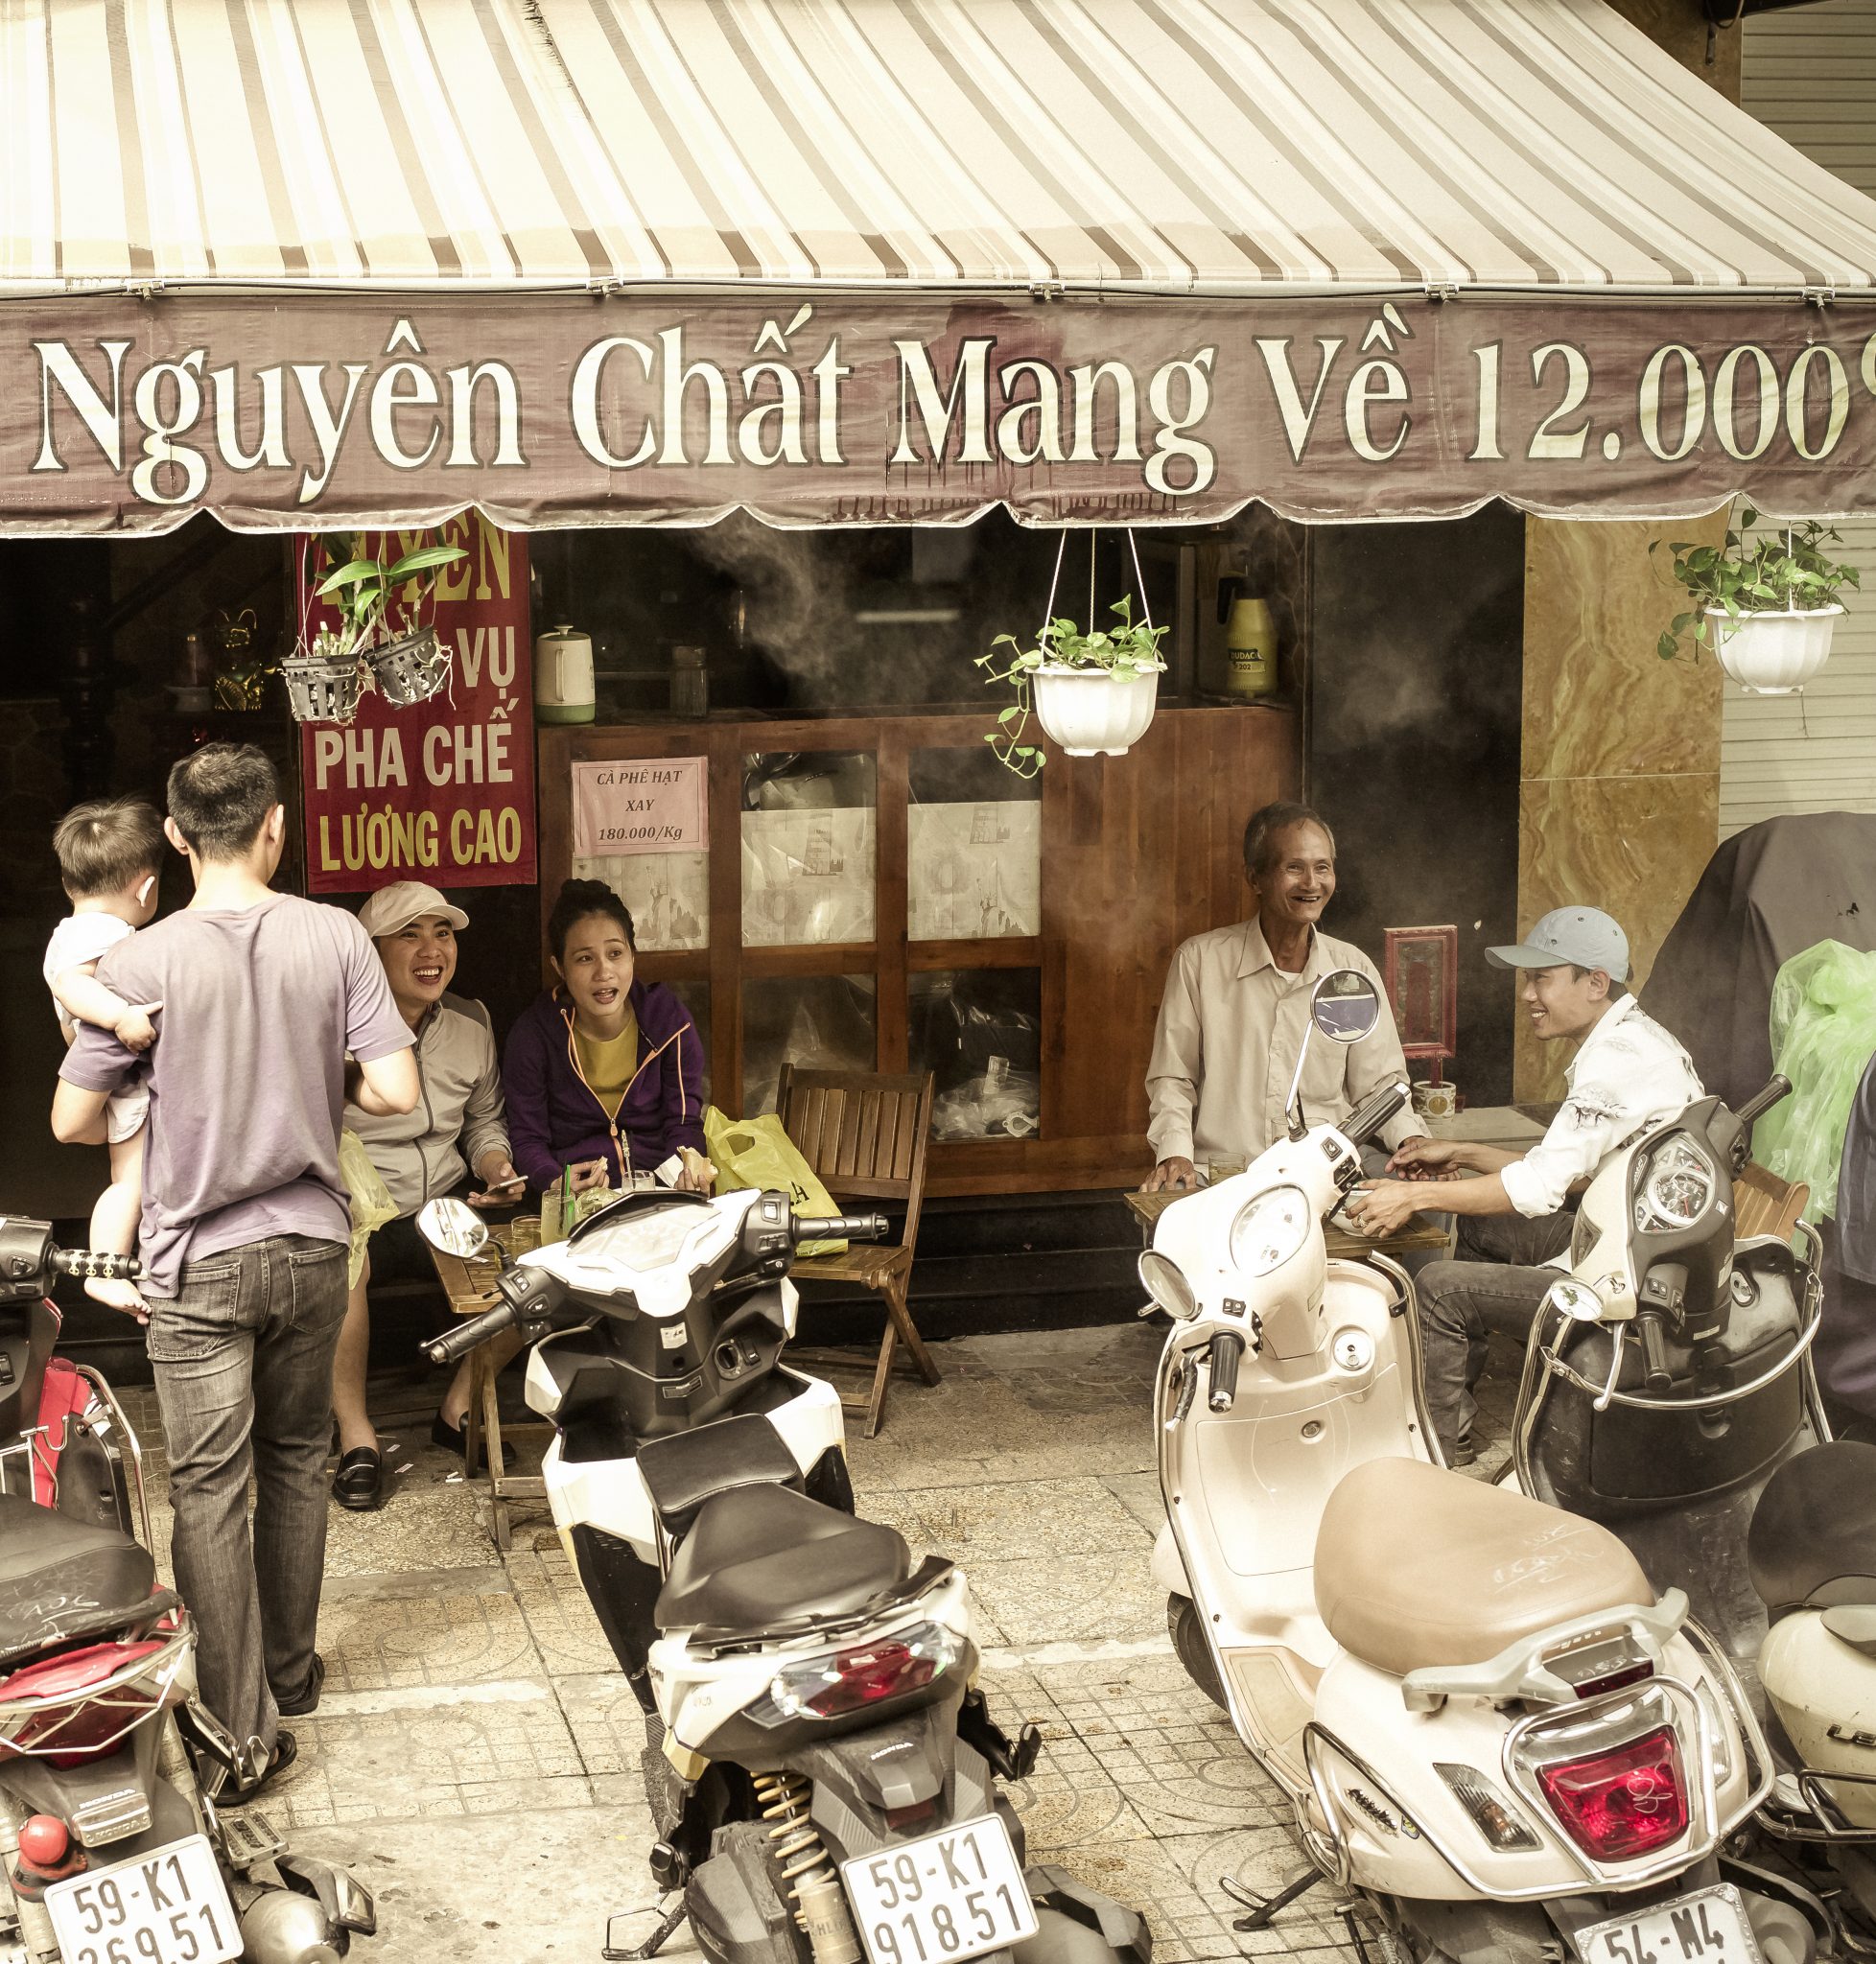 How to understand an American woman in Ho Chi Minh City, Vietnam